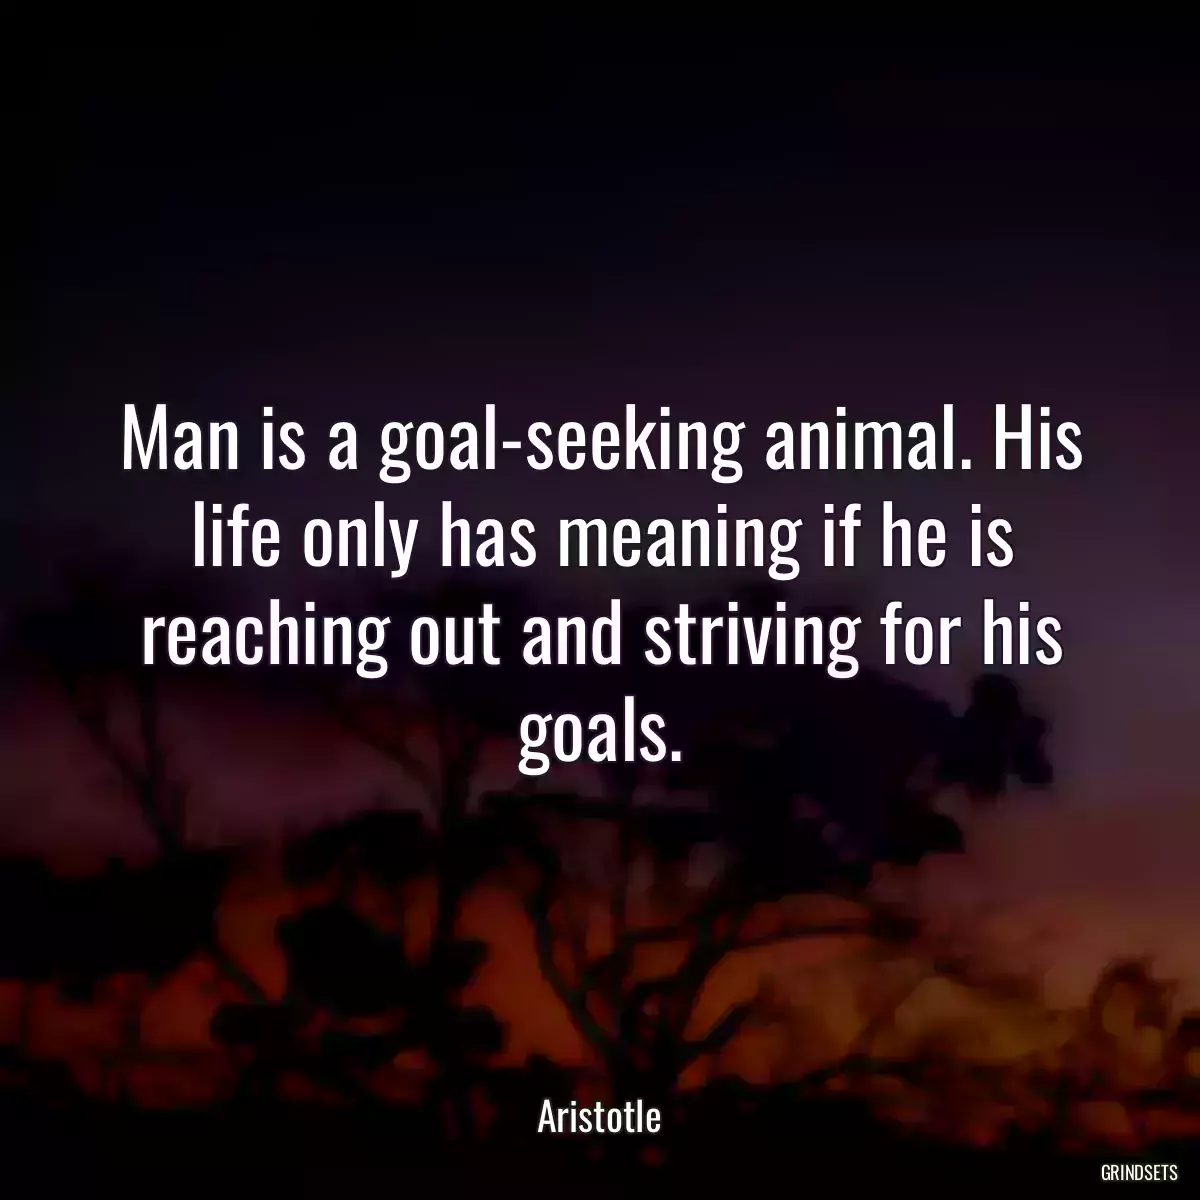 Man is a goal-seeking animal. His life only has meaning if he is reaching out and striving for his goals.